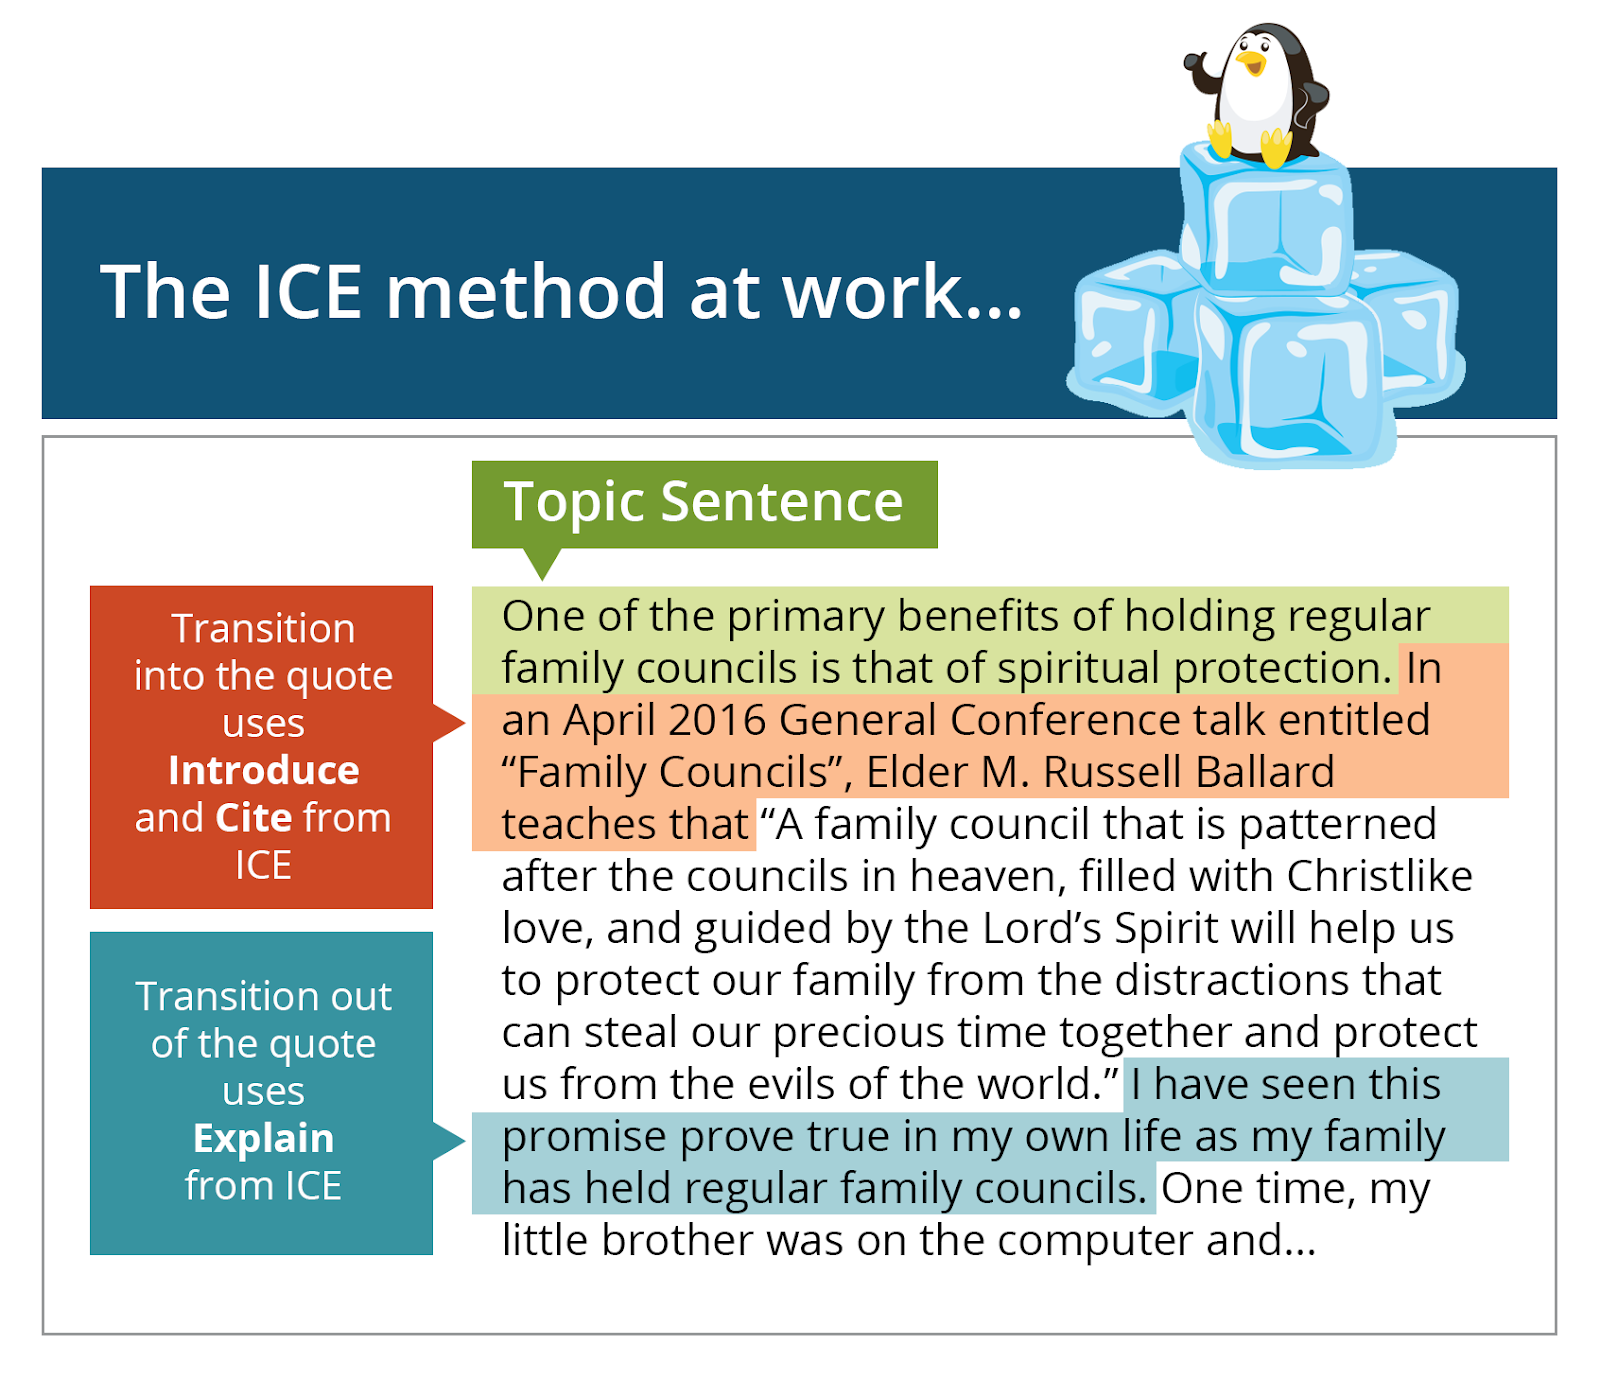 This is an image of how to see the ICE method at work. Topic Sentence: One of the primary benefits of holding regular family councils is that of spiritual protection. Next, transition into the quote uses Introduce and Cite from ICE: In an April 2016 General Conference talk entitled 'Family Councils', Elder M. Russell Ballard teachers that... The wuote will be introduced here. Finally, transition out of the quote uses Explain from ICE: I have seen this promise prove true in my own life as my family has held regular family councils.